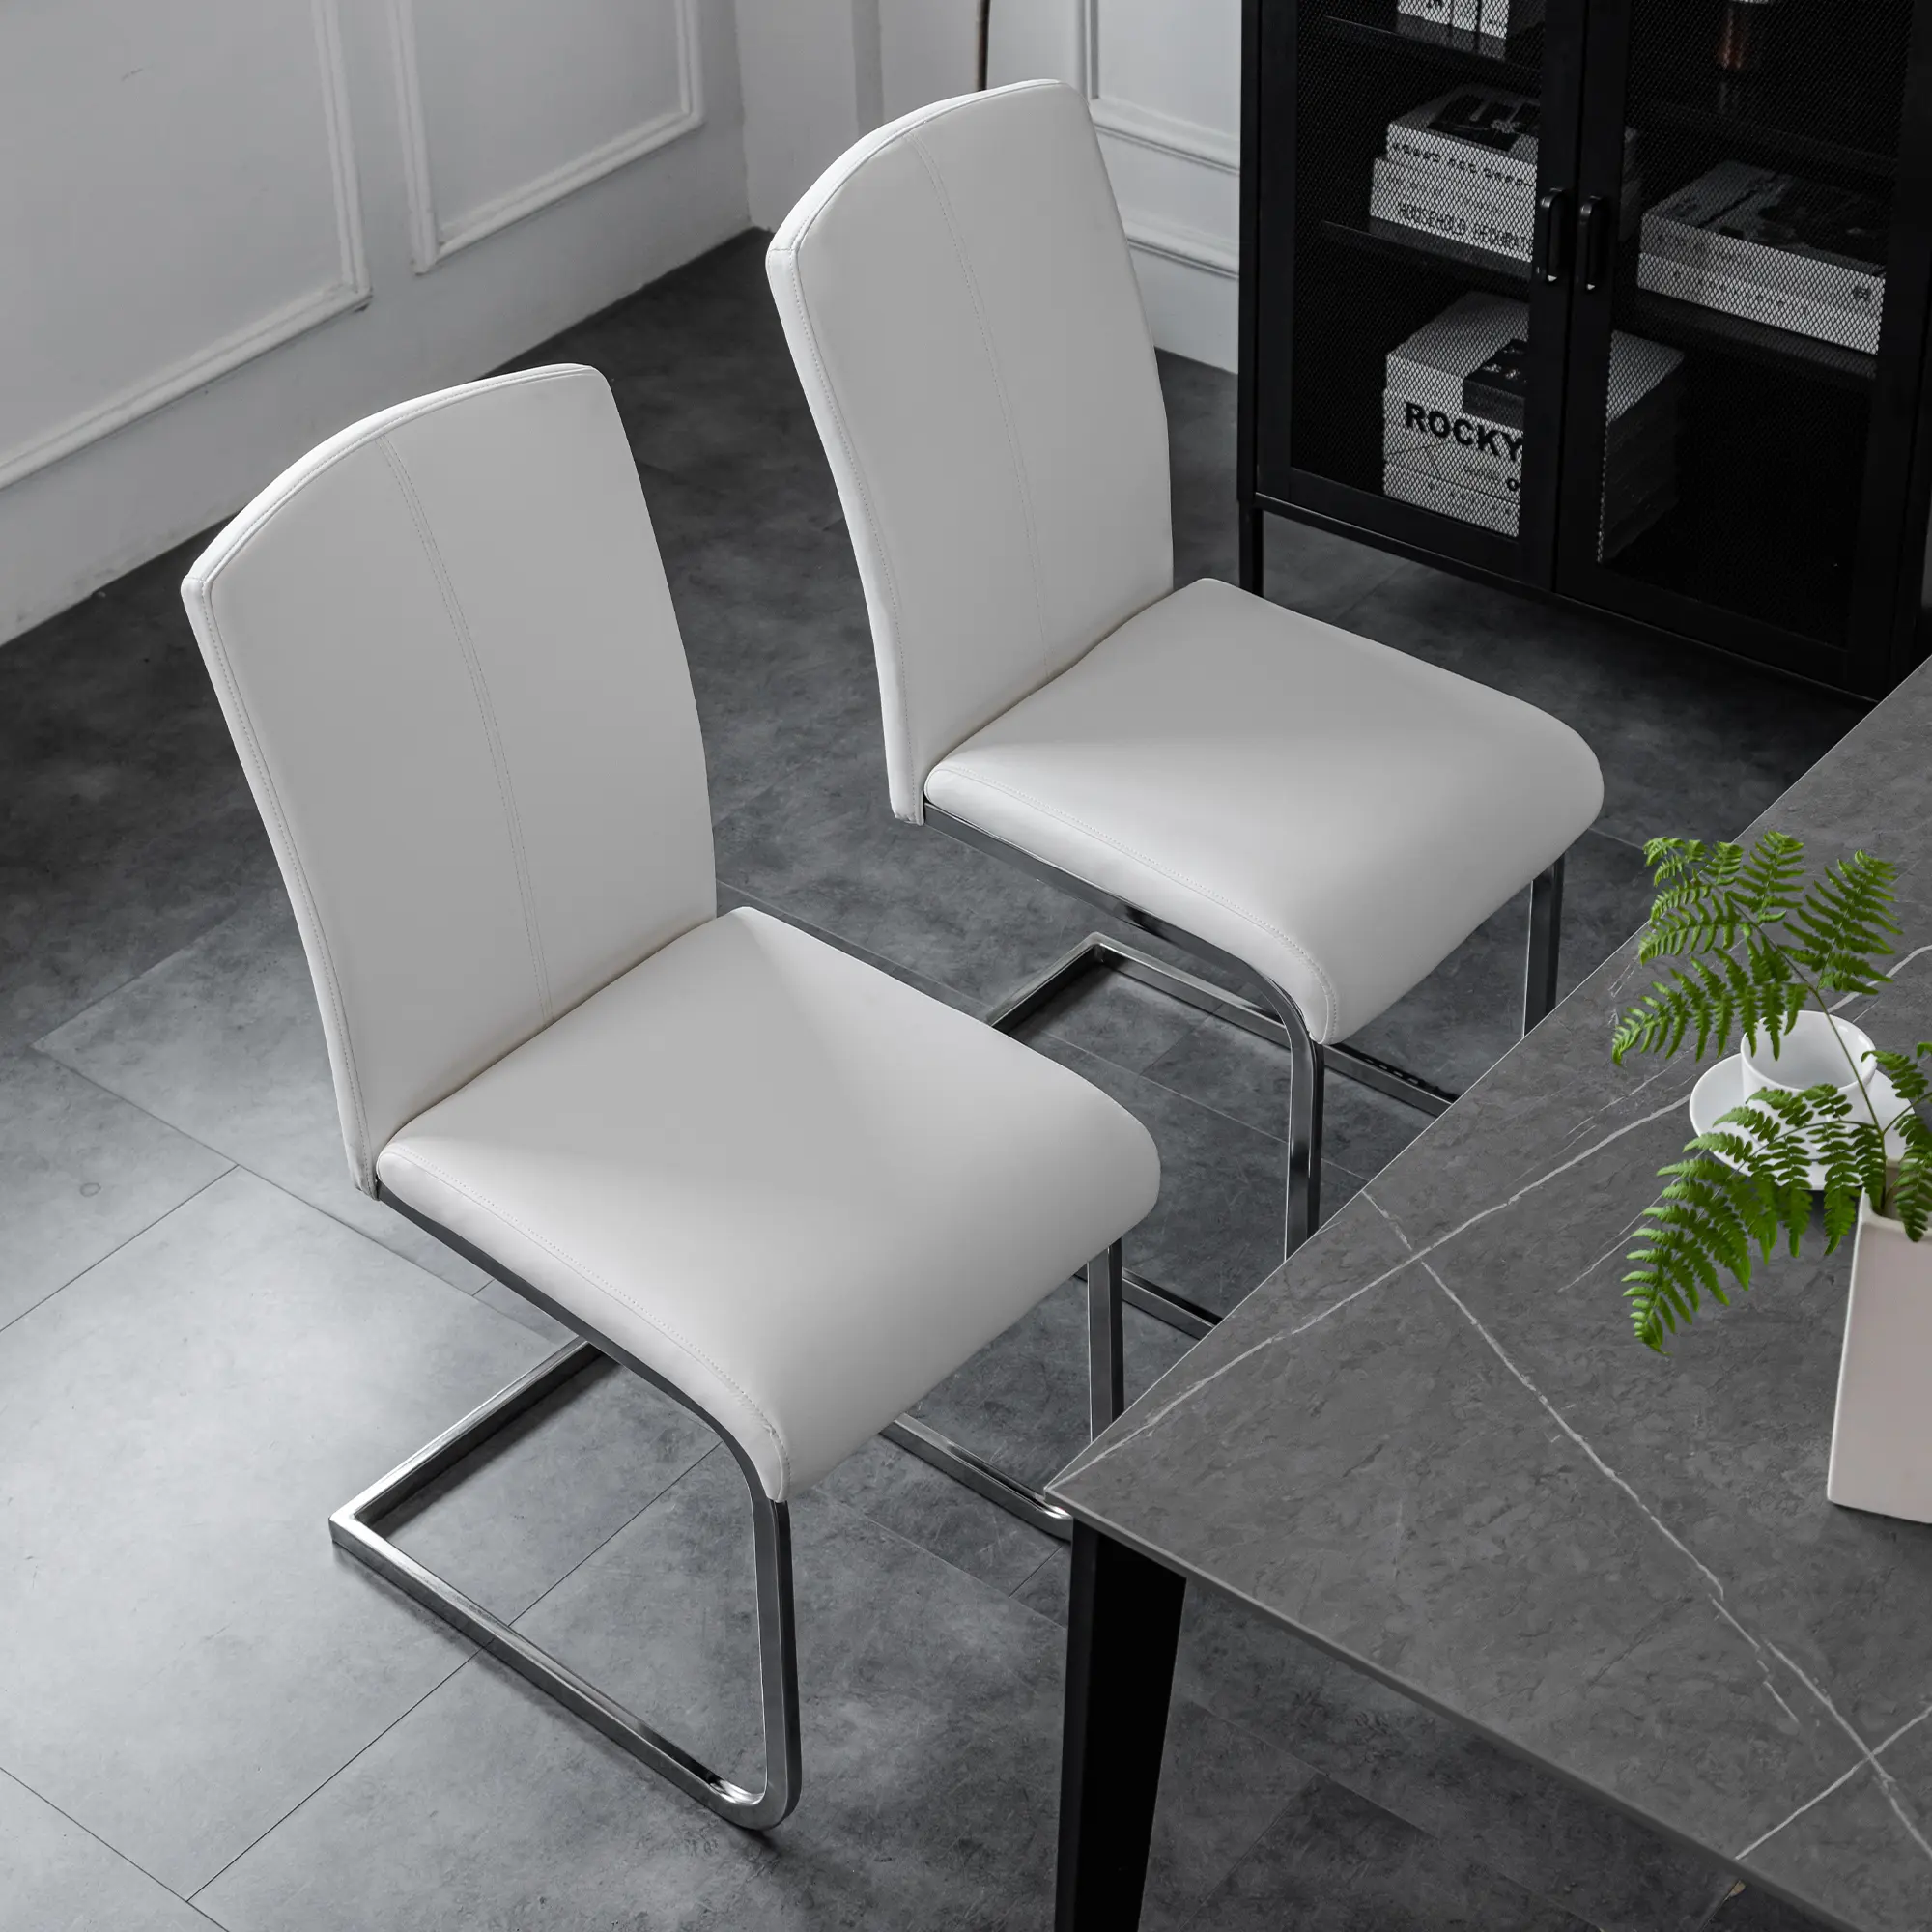 https://www.wyida.com/white-dining-chair-upholstered-side-kitchen-and-dining-room-chair-product/